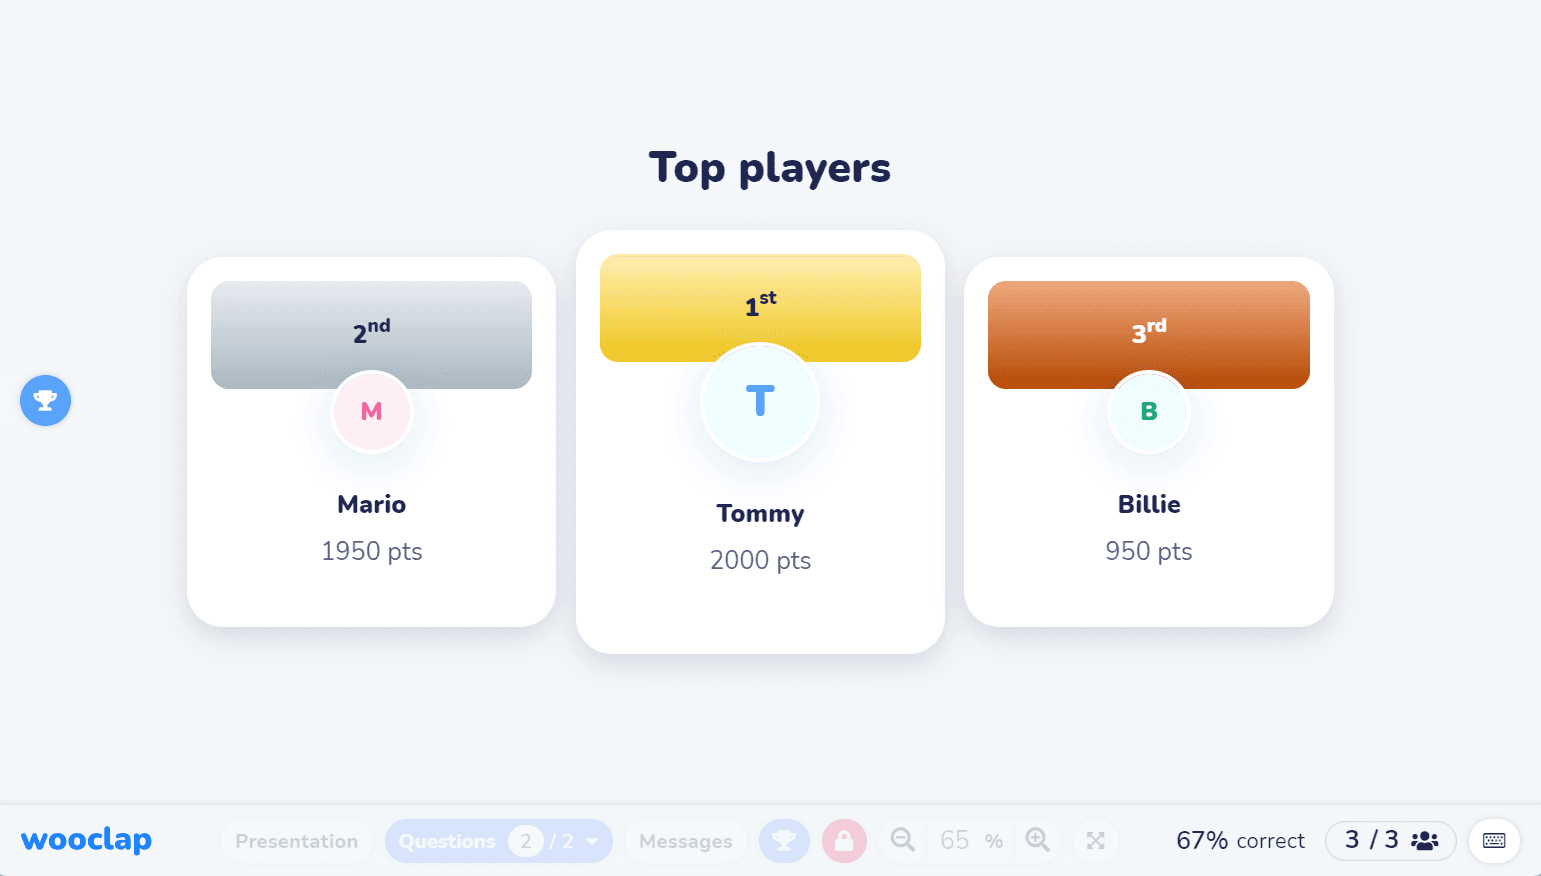 Wooclap's leaderboards are more customizable and personalized. They include images.